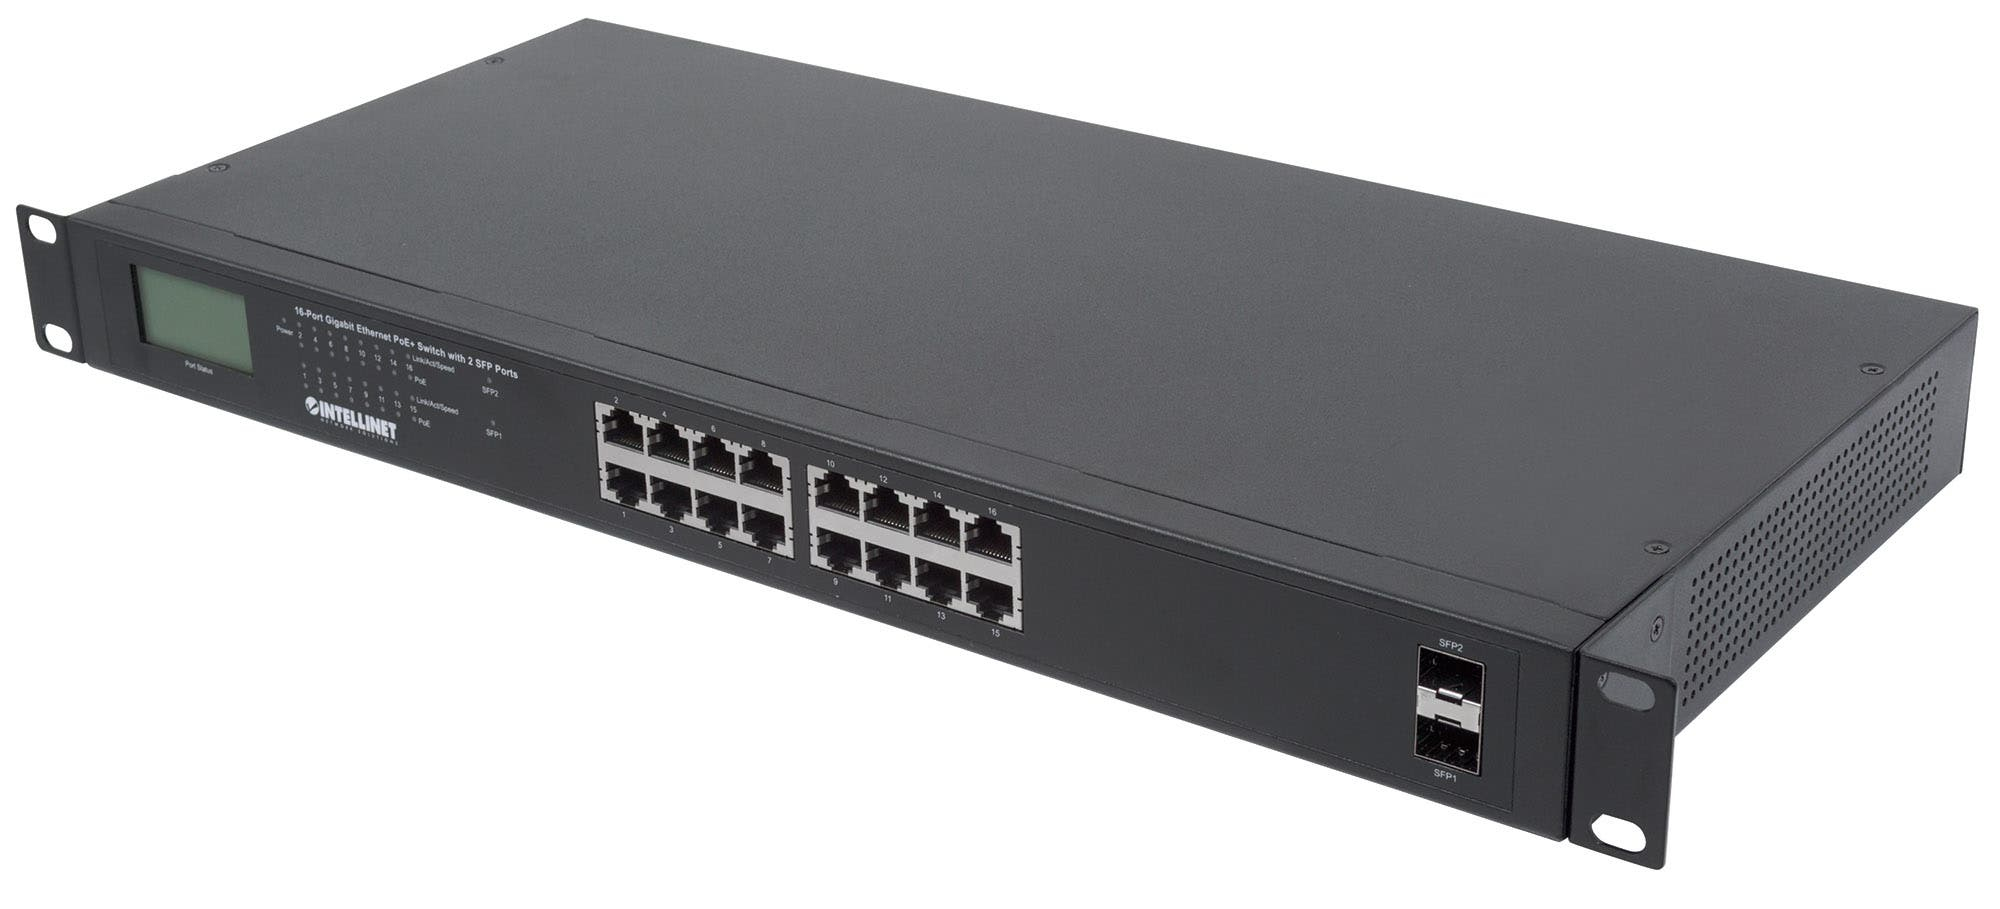 Intellinet 16-Port Gigabit Ethernet PoE+ Switch with 2 SFP Ports, LCD Display, IEEE 802.3at/af Power over Ethernet (PoE+/PoE) Compliant, 370 W, Endspan, 19" Rackmount (UK 3-pin plug)